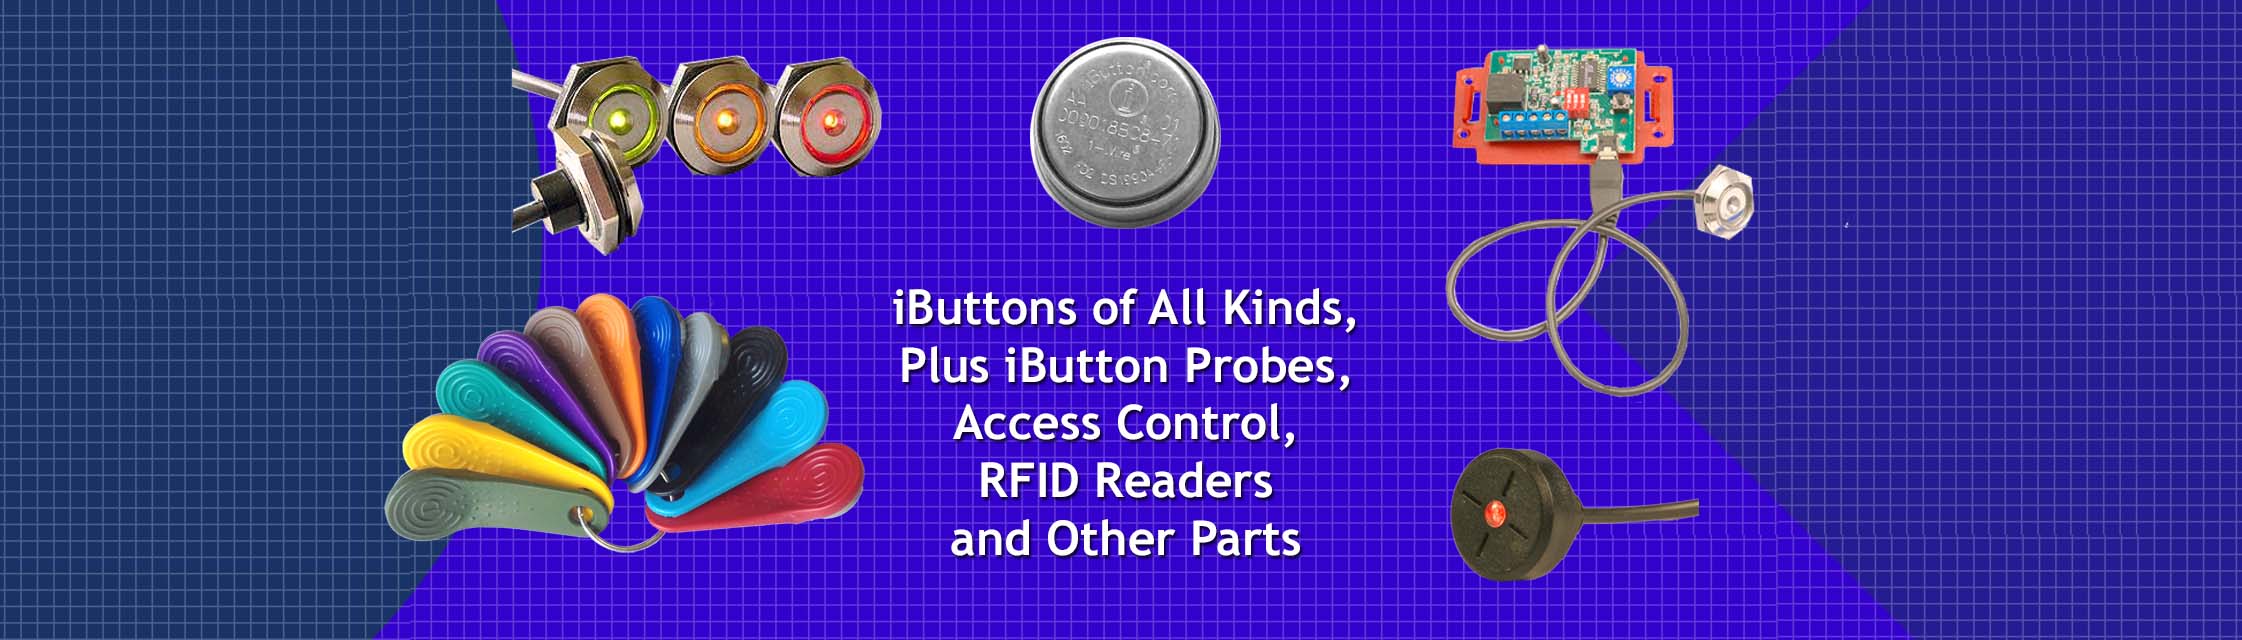 Authentic iButtons, plus iButton Probes, Access Control, RFID Readers and other parts